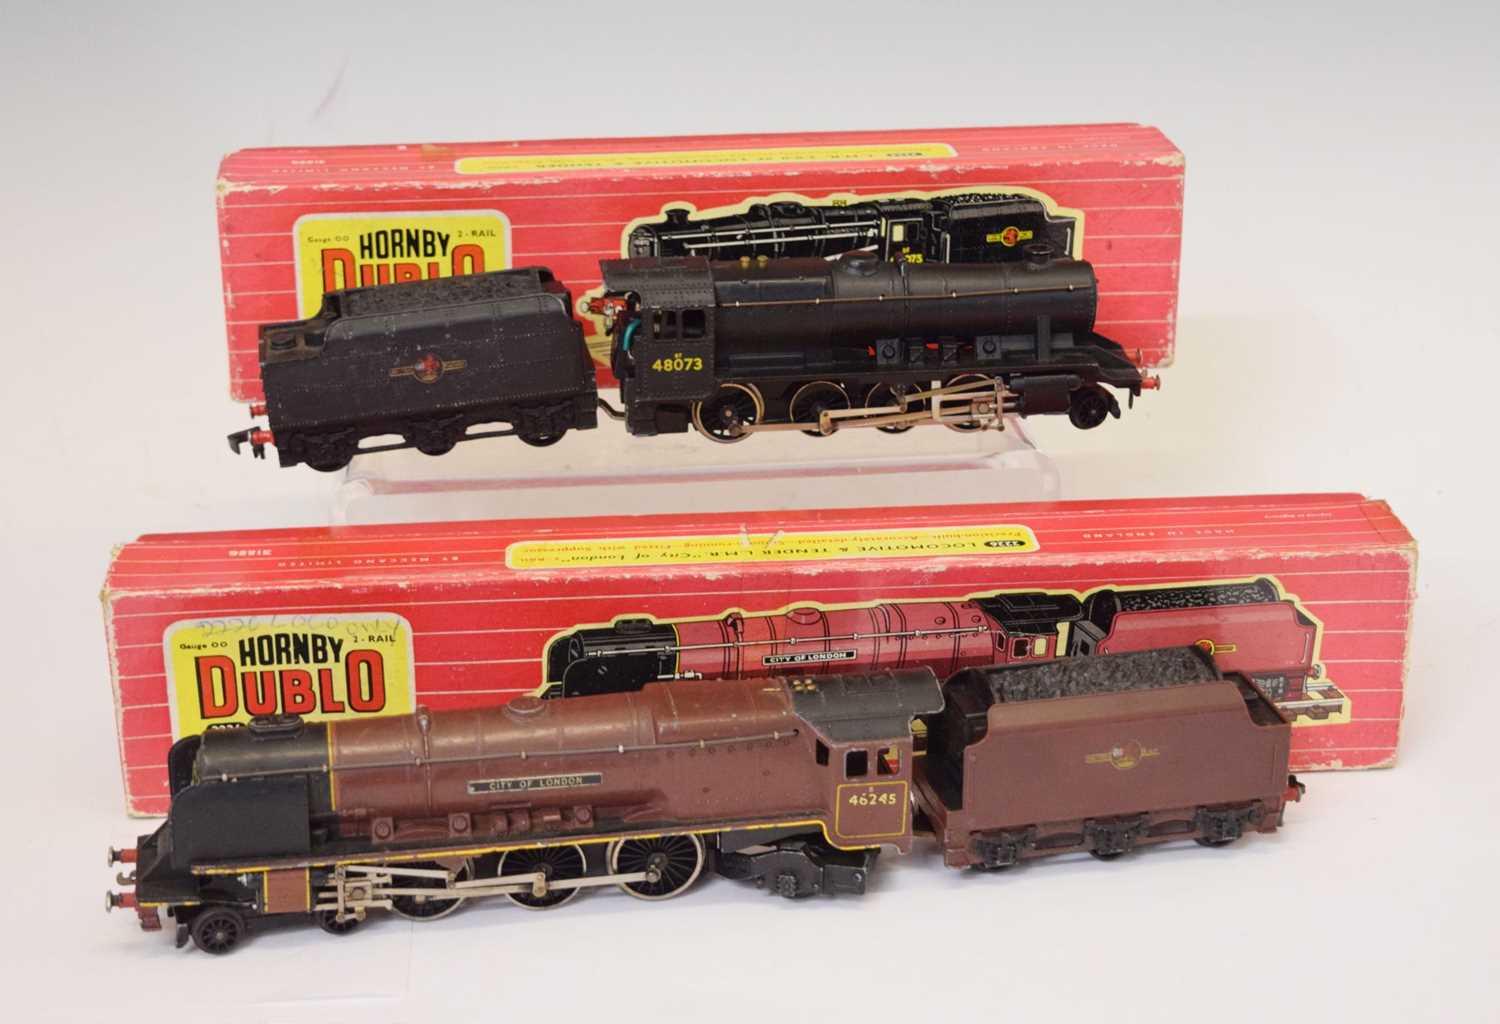 Hornby Dublo - Two boxed 00 gauge railway trainset locomotives with tenders